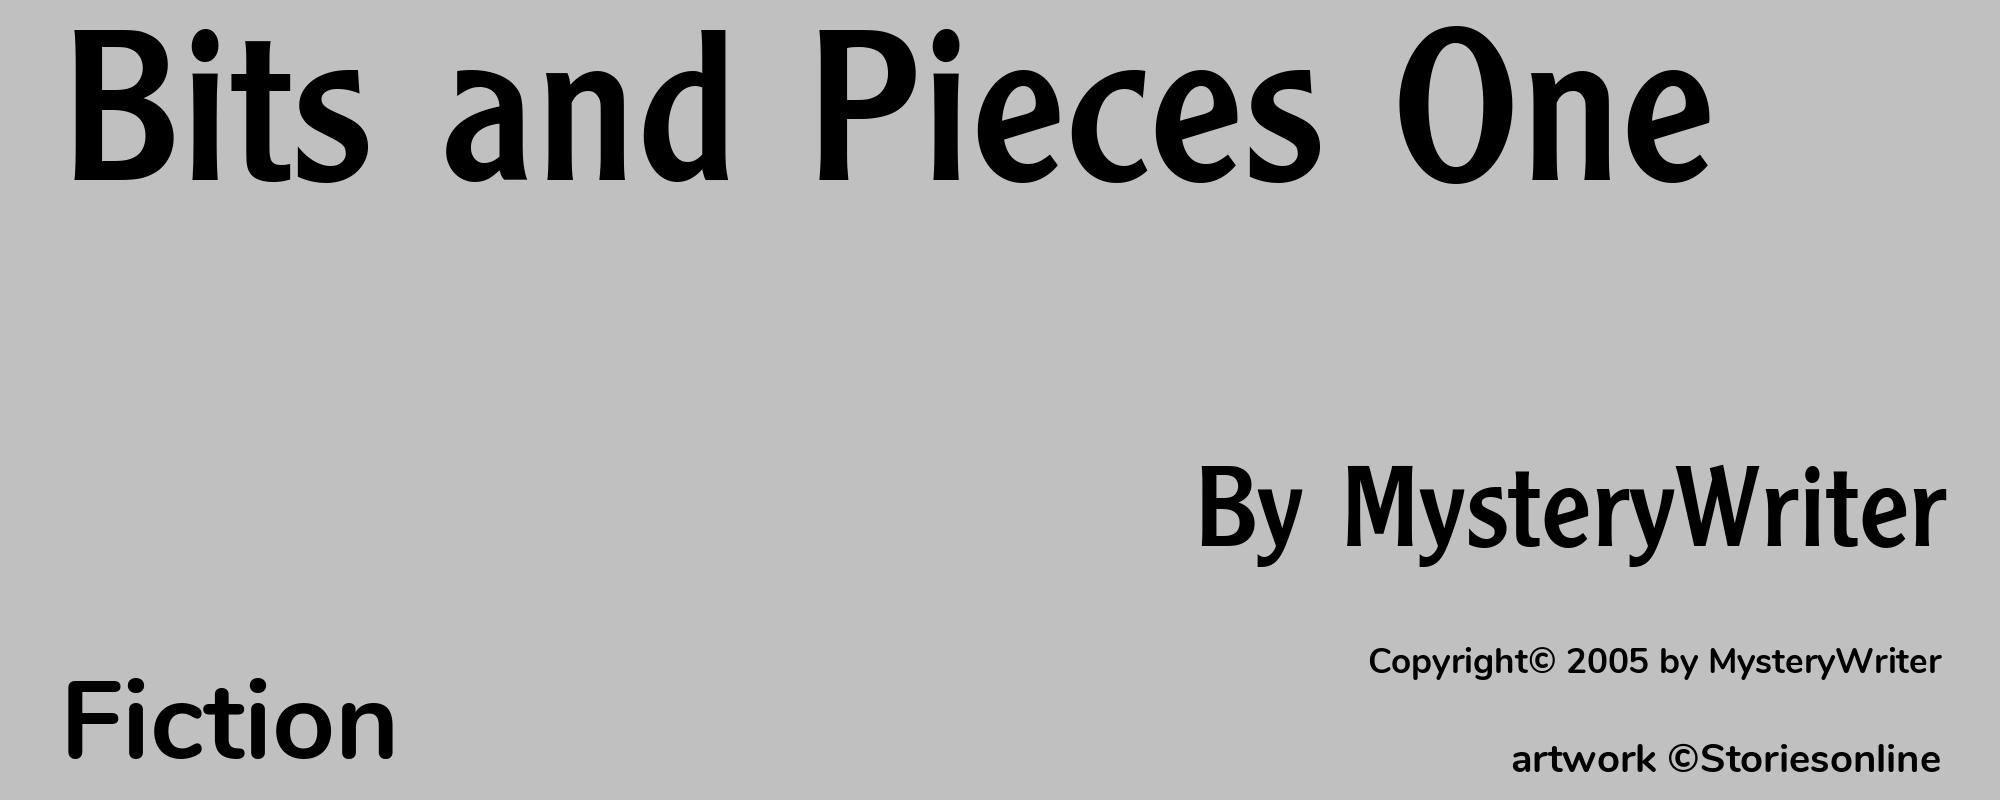 Bits and Pieces One - Cover